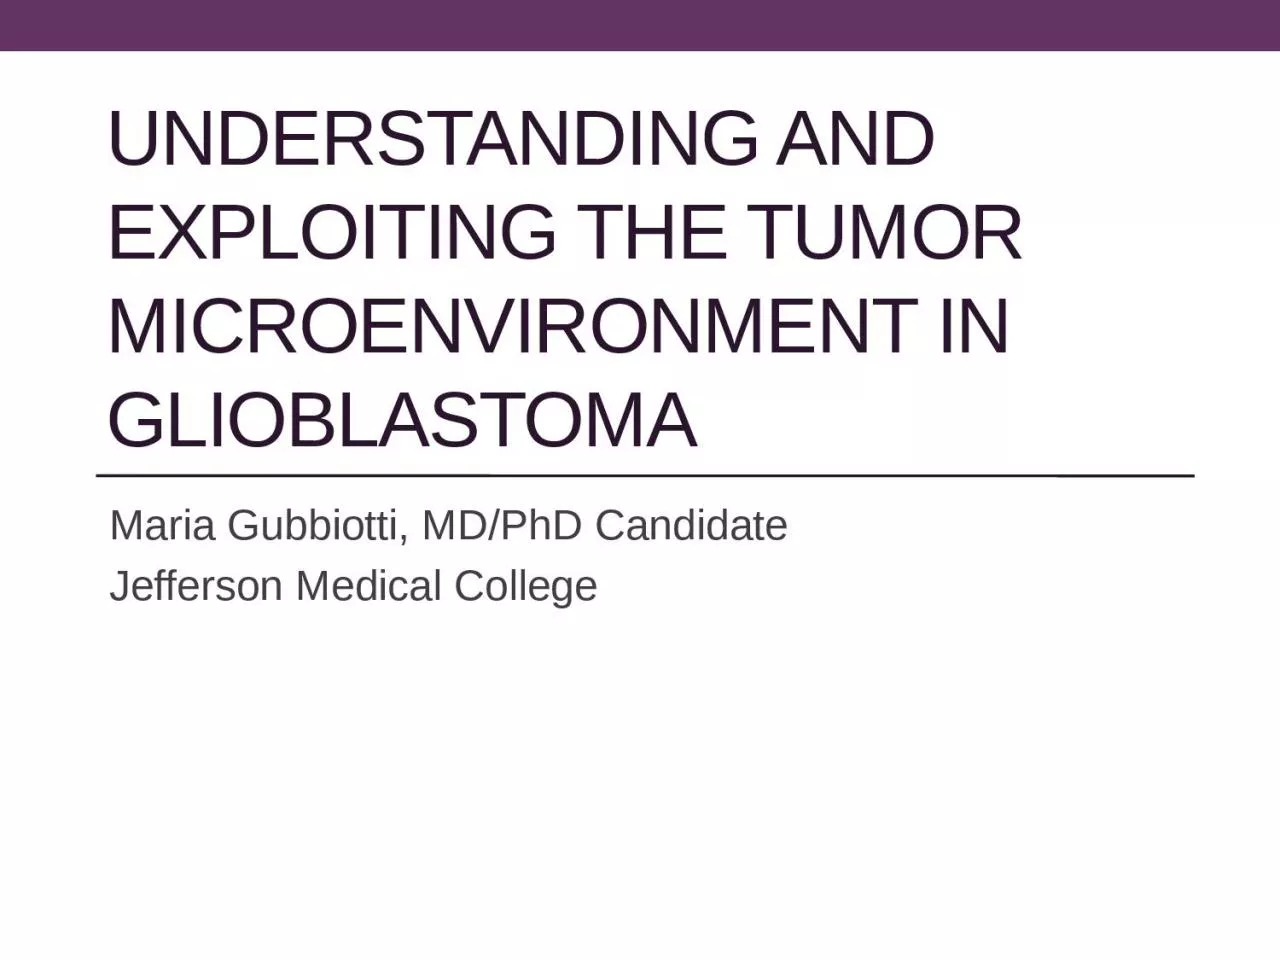 Understanding and Exploiting the Tumor Microenvironment in